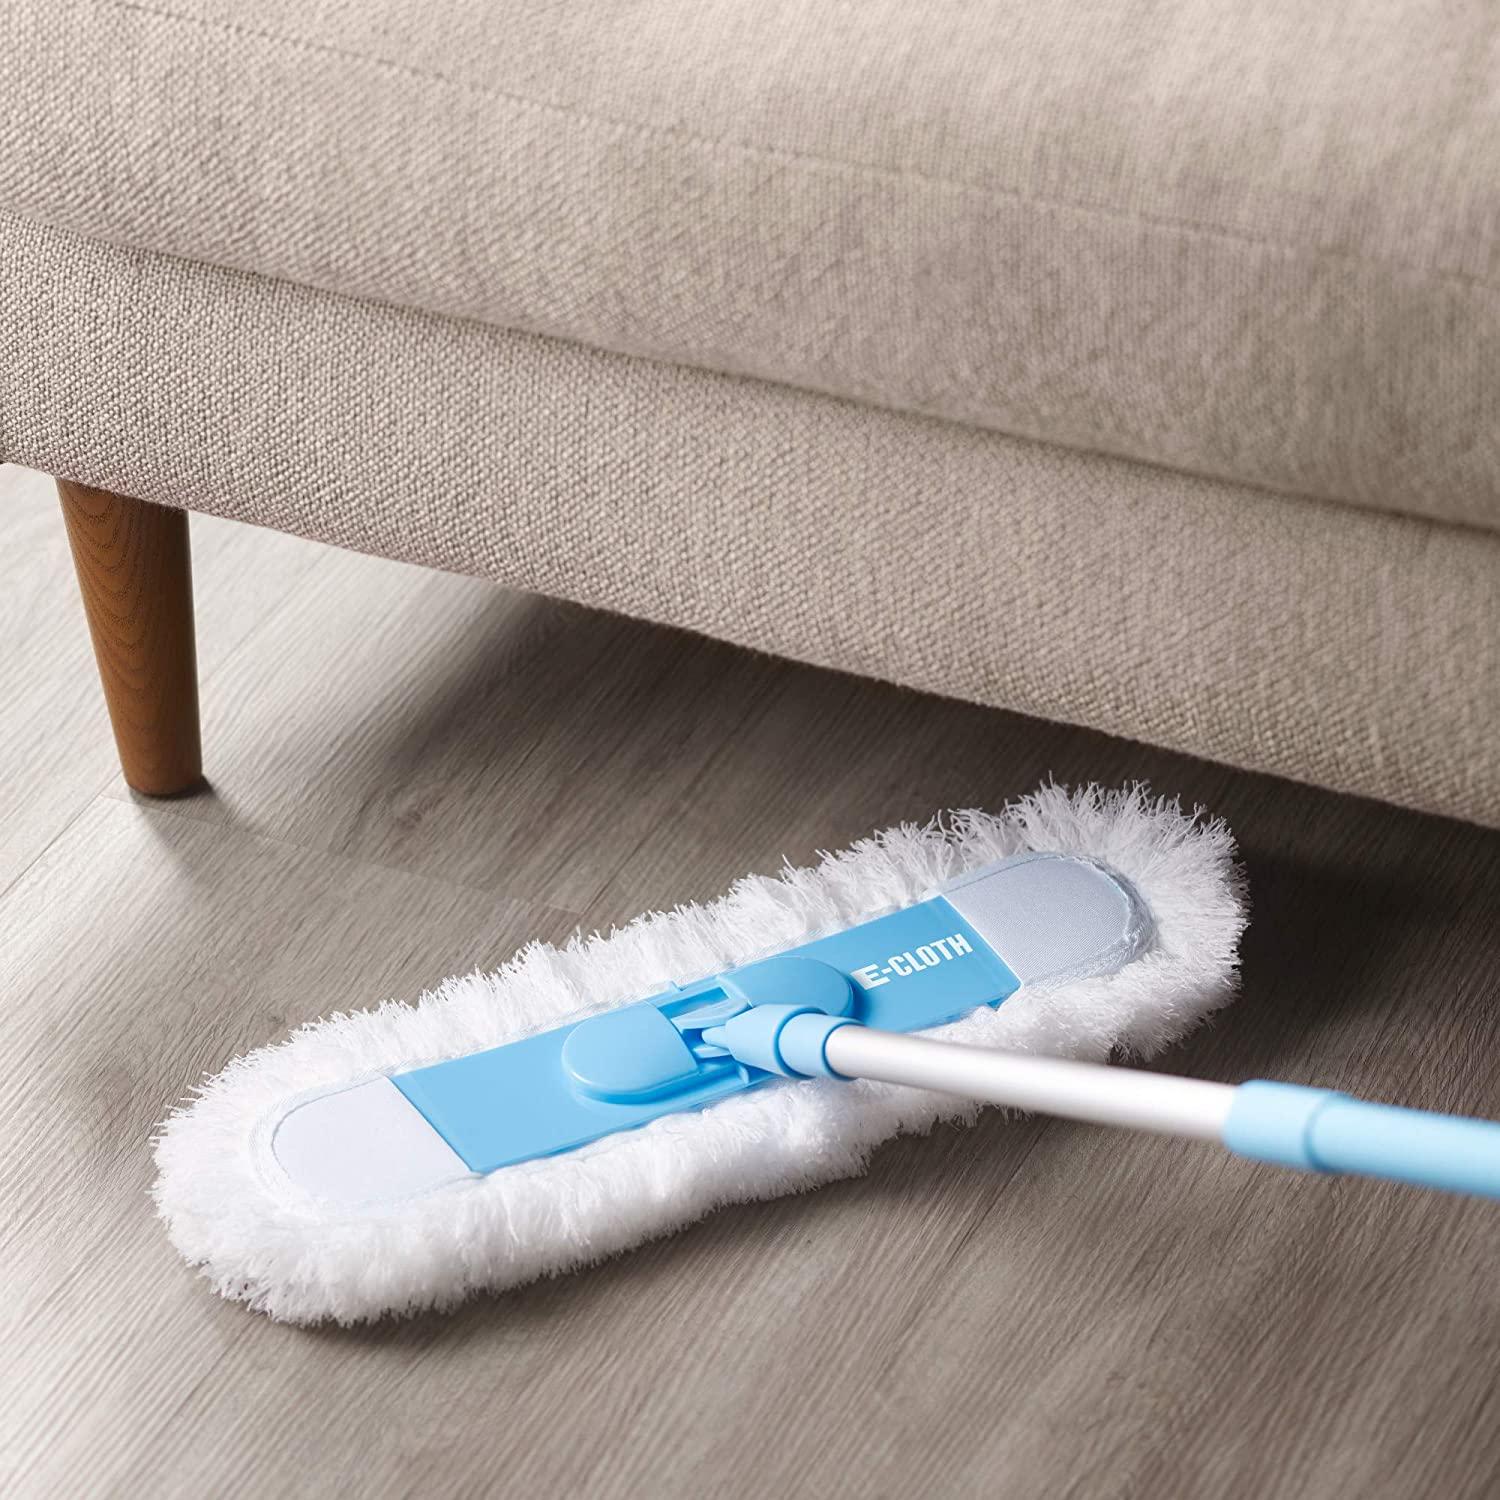 Mops Cleaning Walls, Mops Floor Cleaning